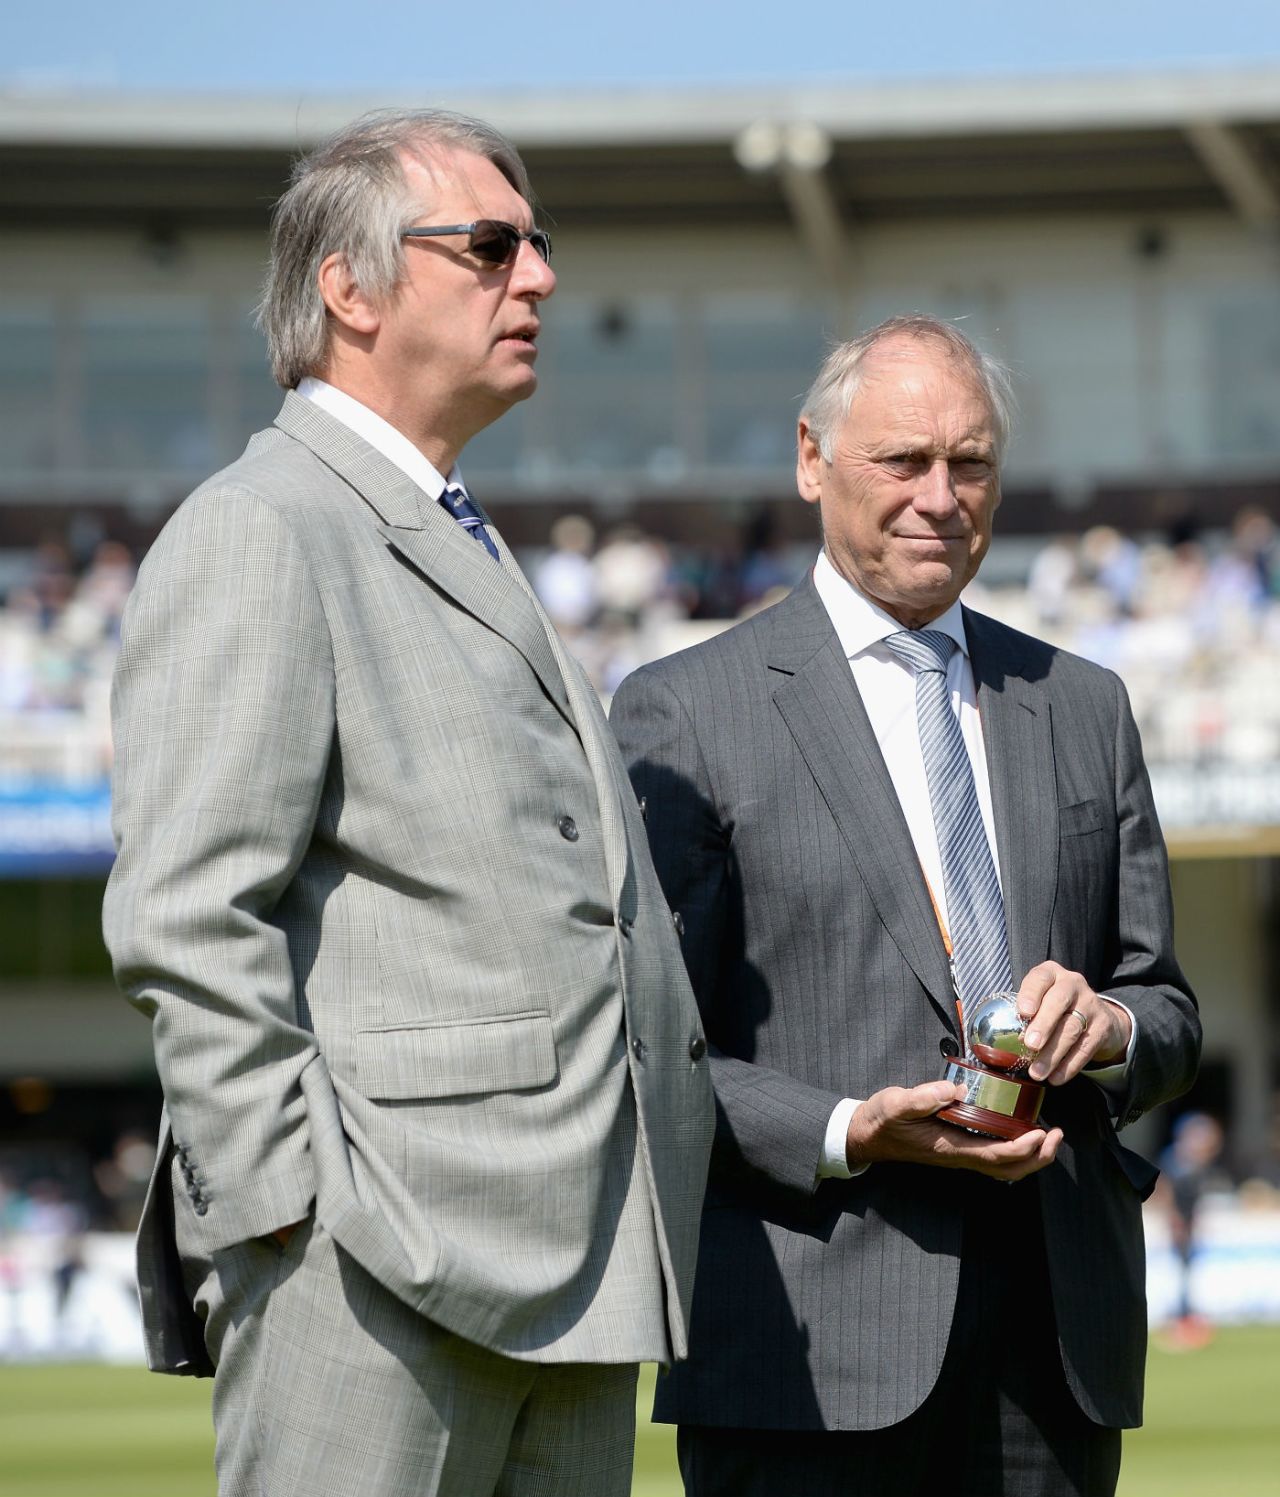 Giles Clarke and Colin Graves at Lord's during the first Test against New Zealand in 2015, England v New Zealand, May 20, 2015